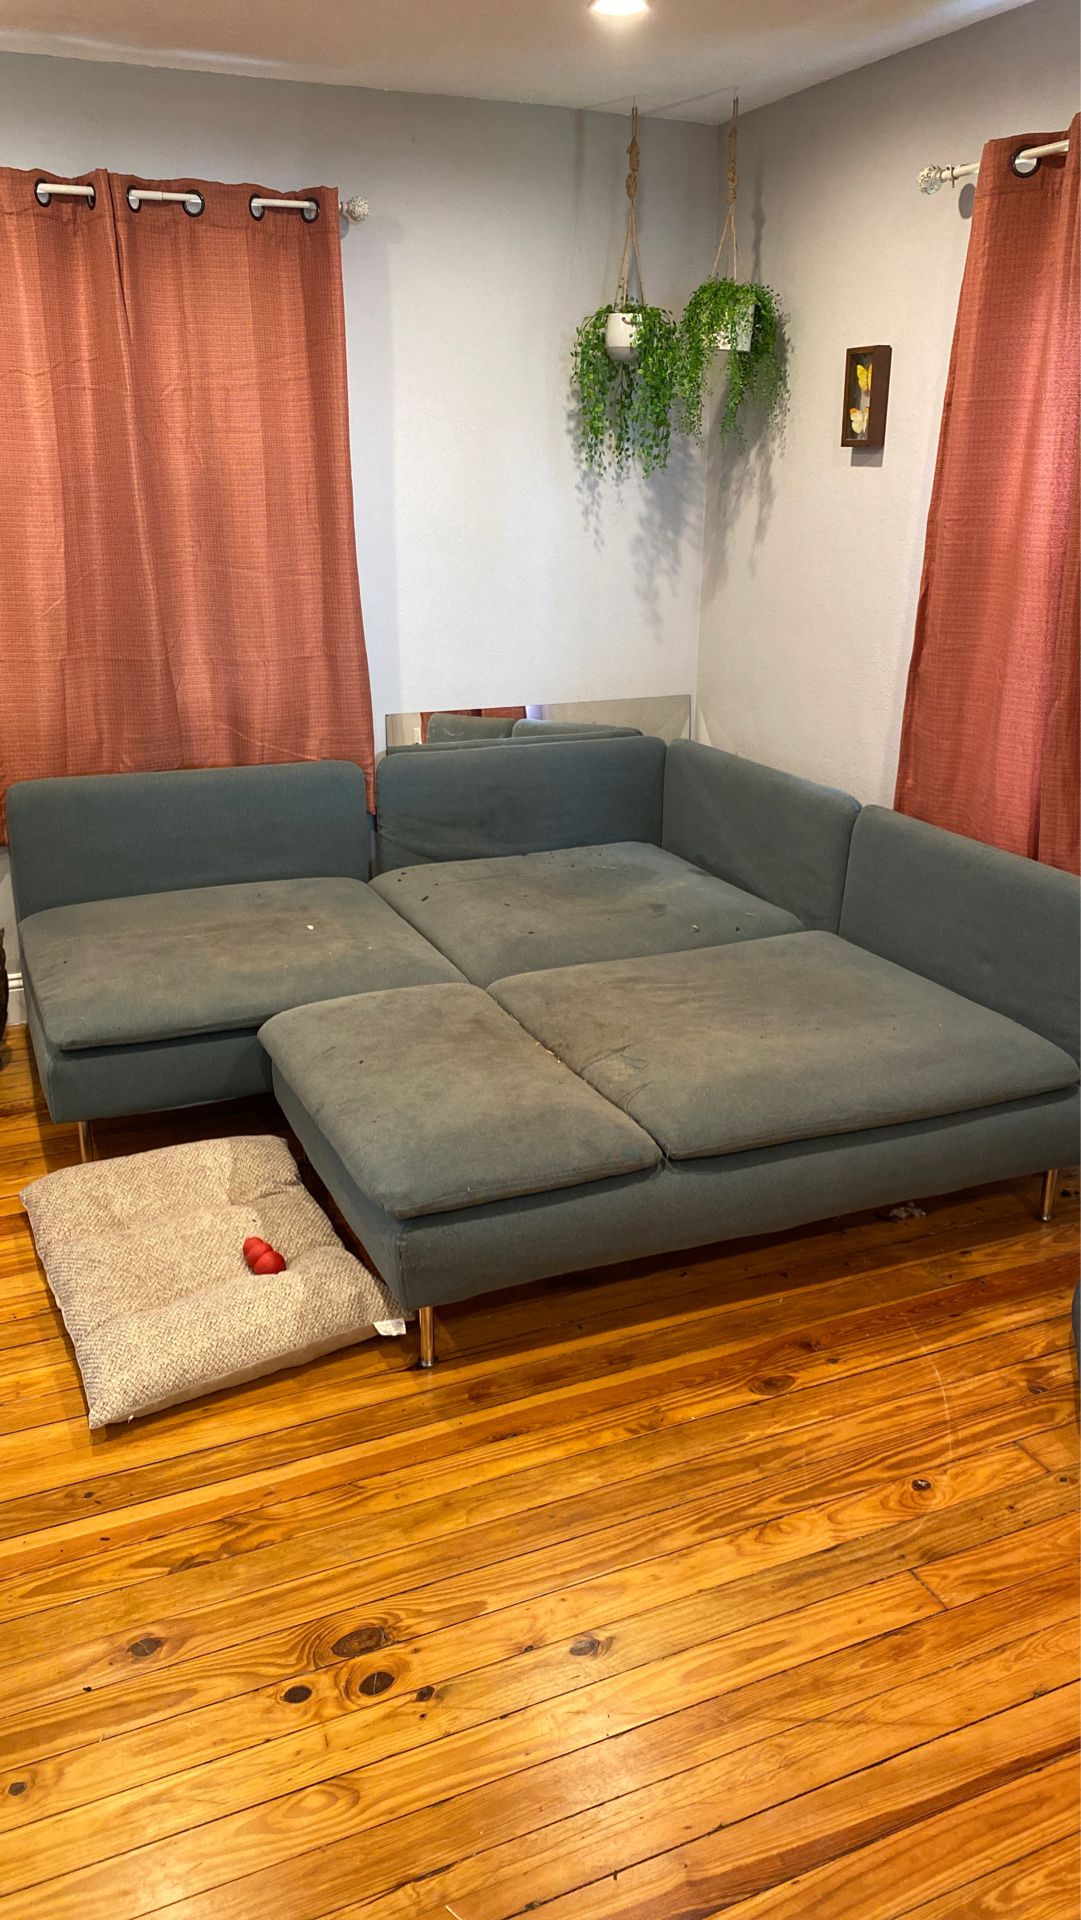 FREE COUCH (refinishing project)